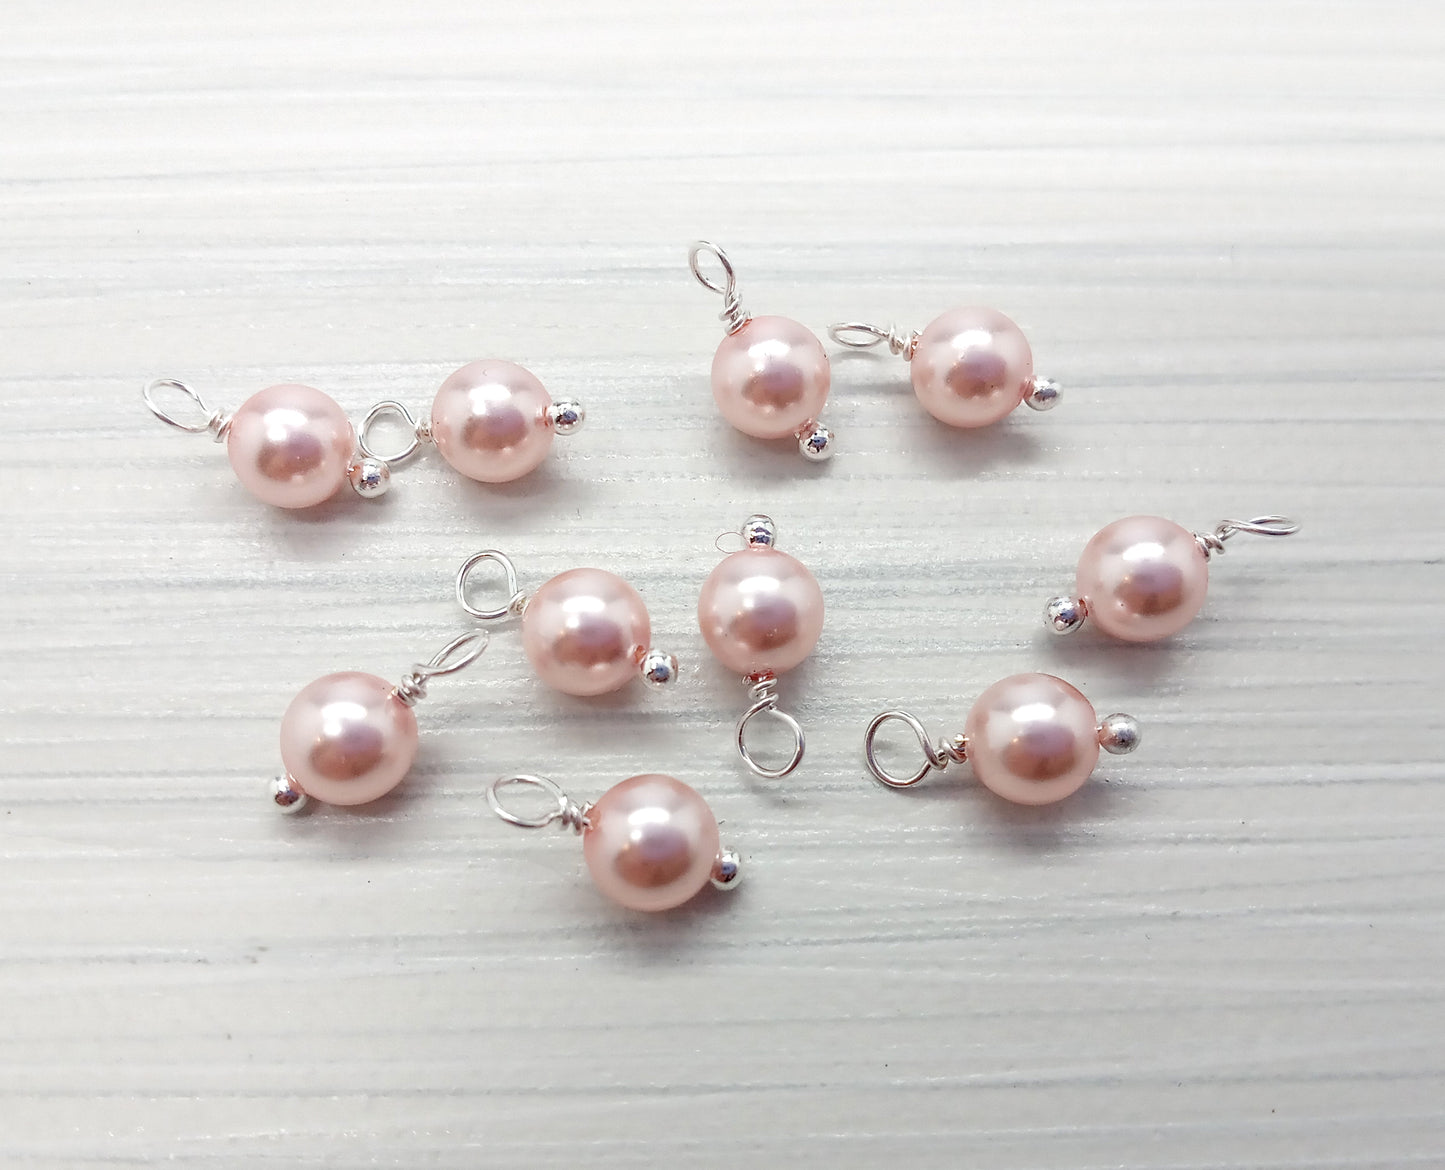 Crystal Pearl Bead Charms, Small Pink 6mm Dangles - Adorabilities Charms & Trinkets